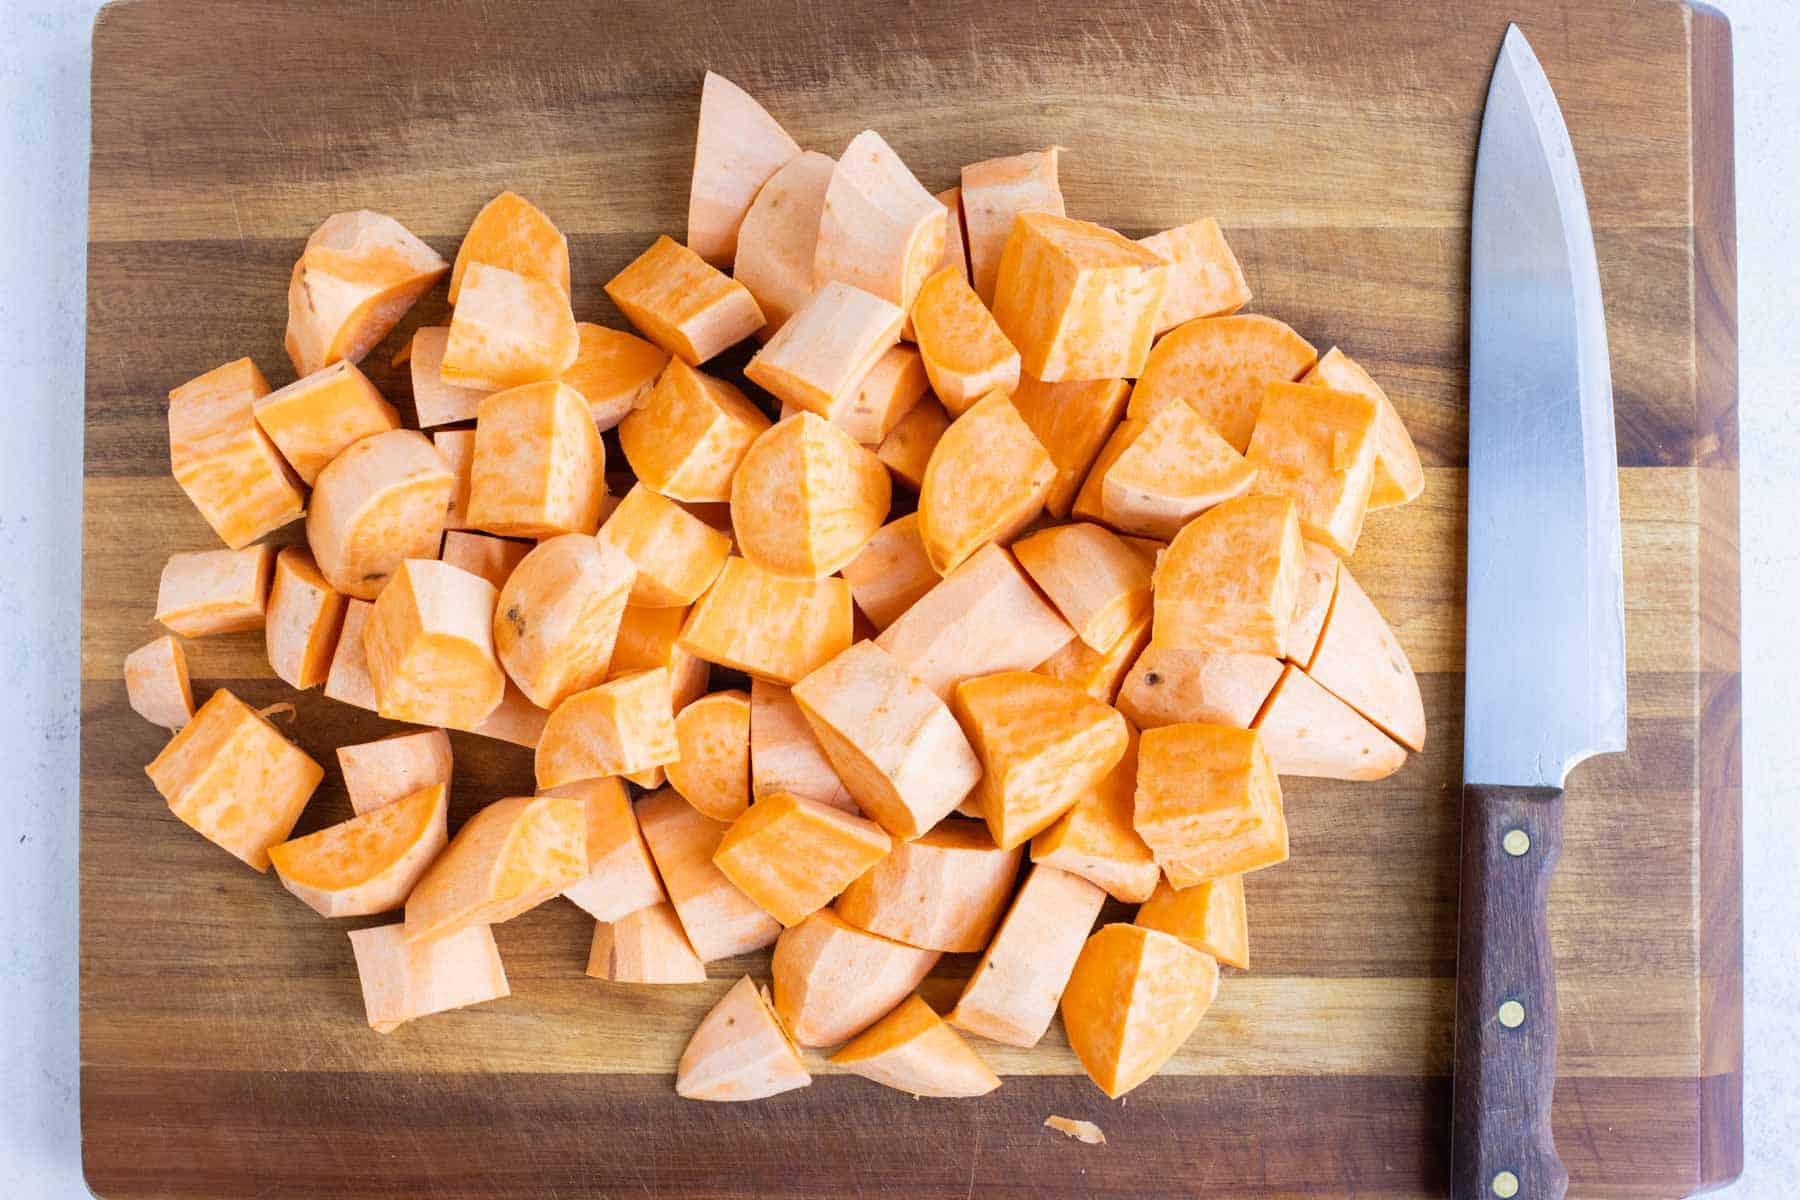 Diced and peeled sweet potatoes are ready to boil.